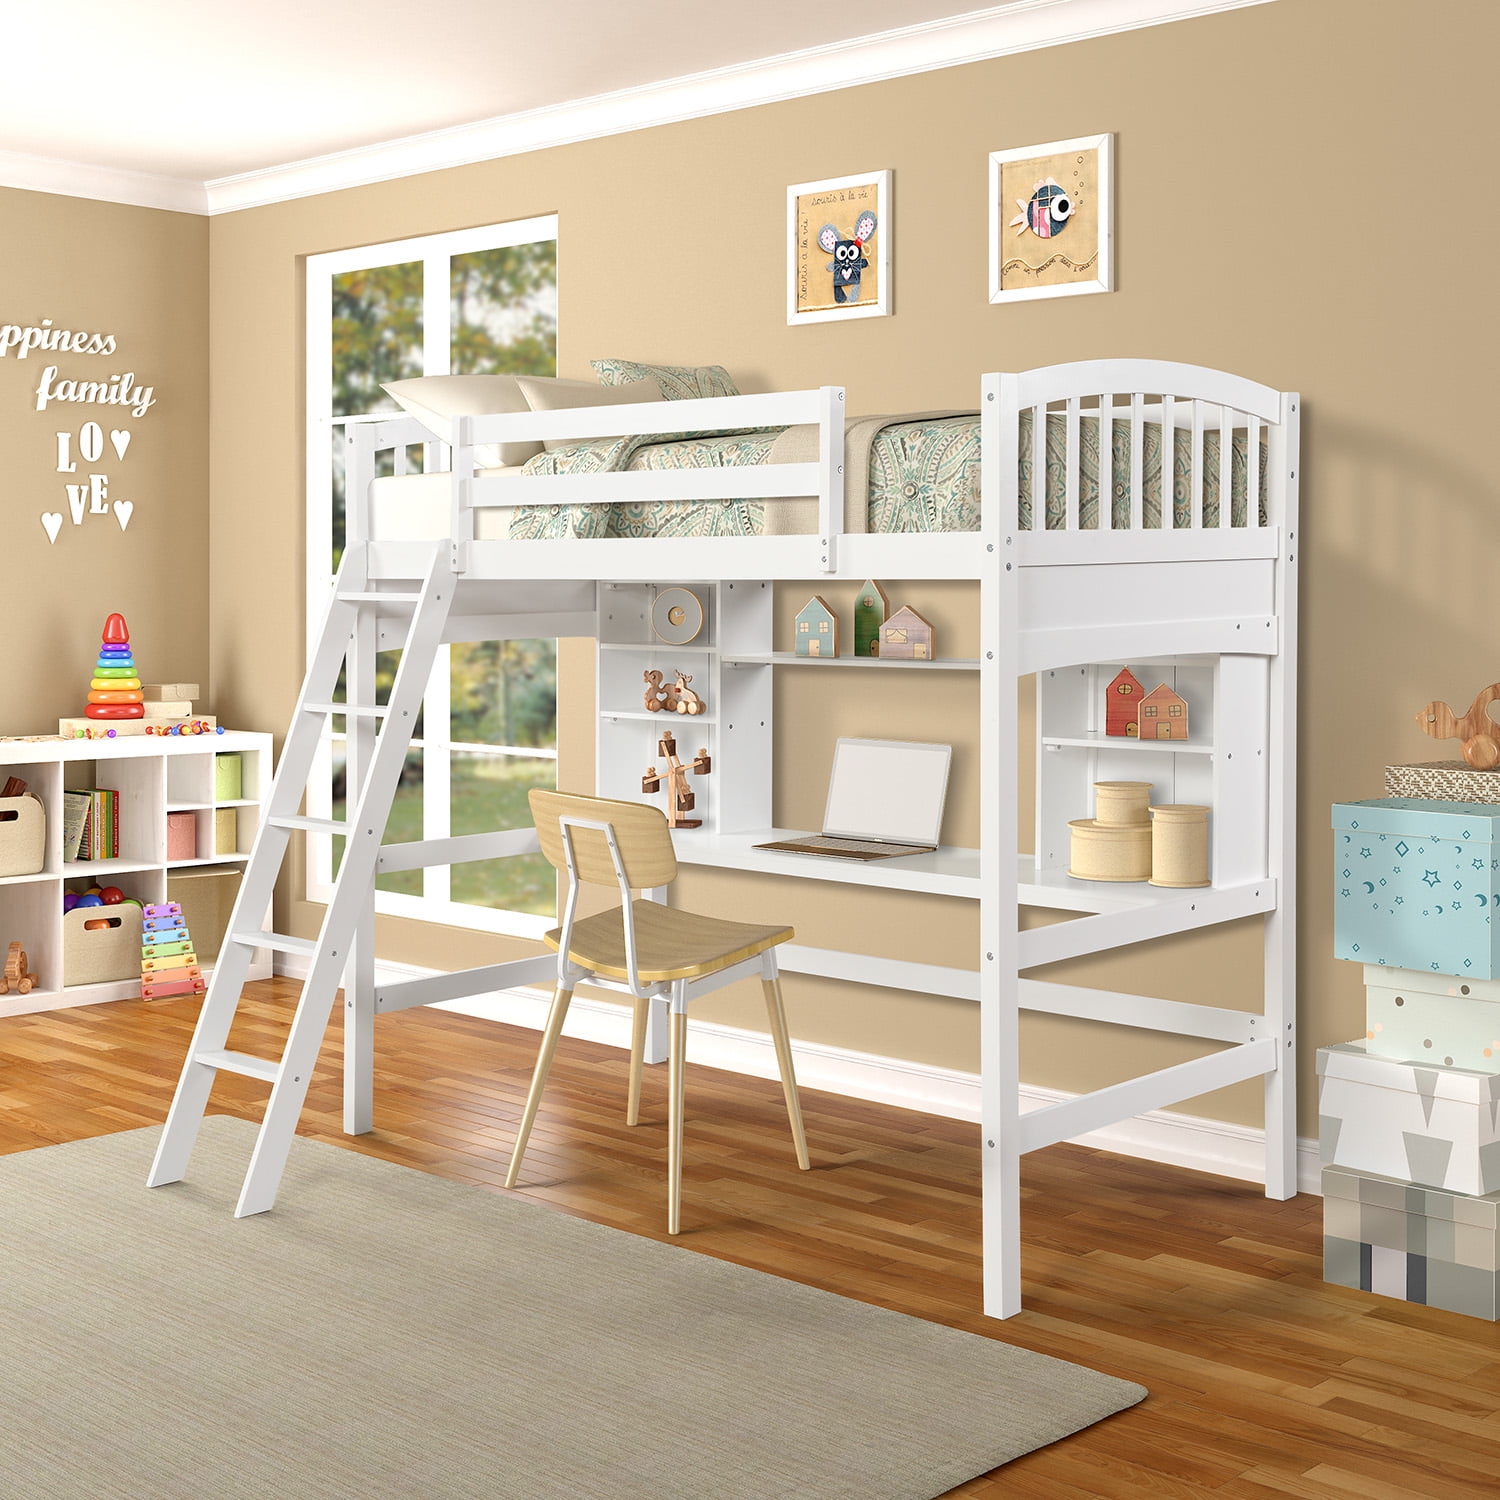 Tfixol Nbsp Twin Size Loft Bed With, Bunk Beds Under 300